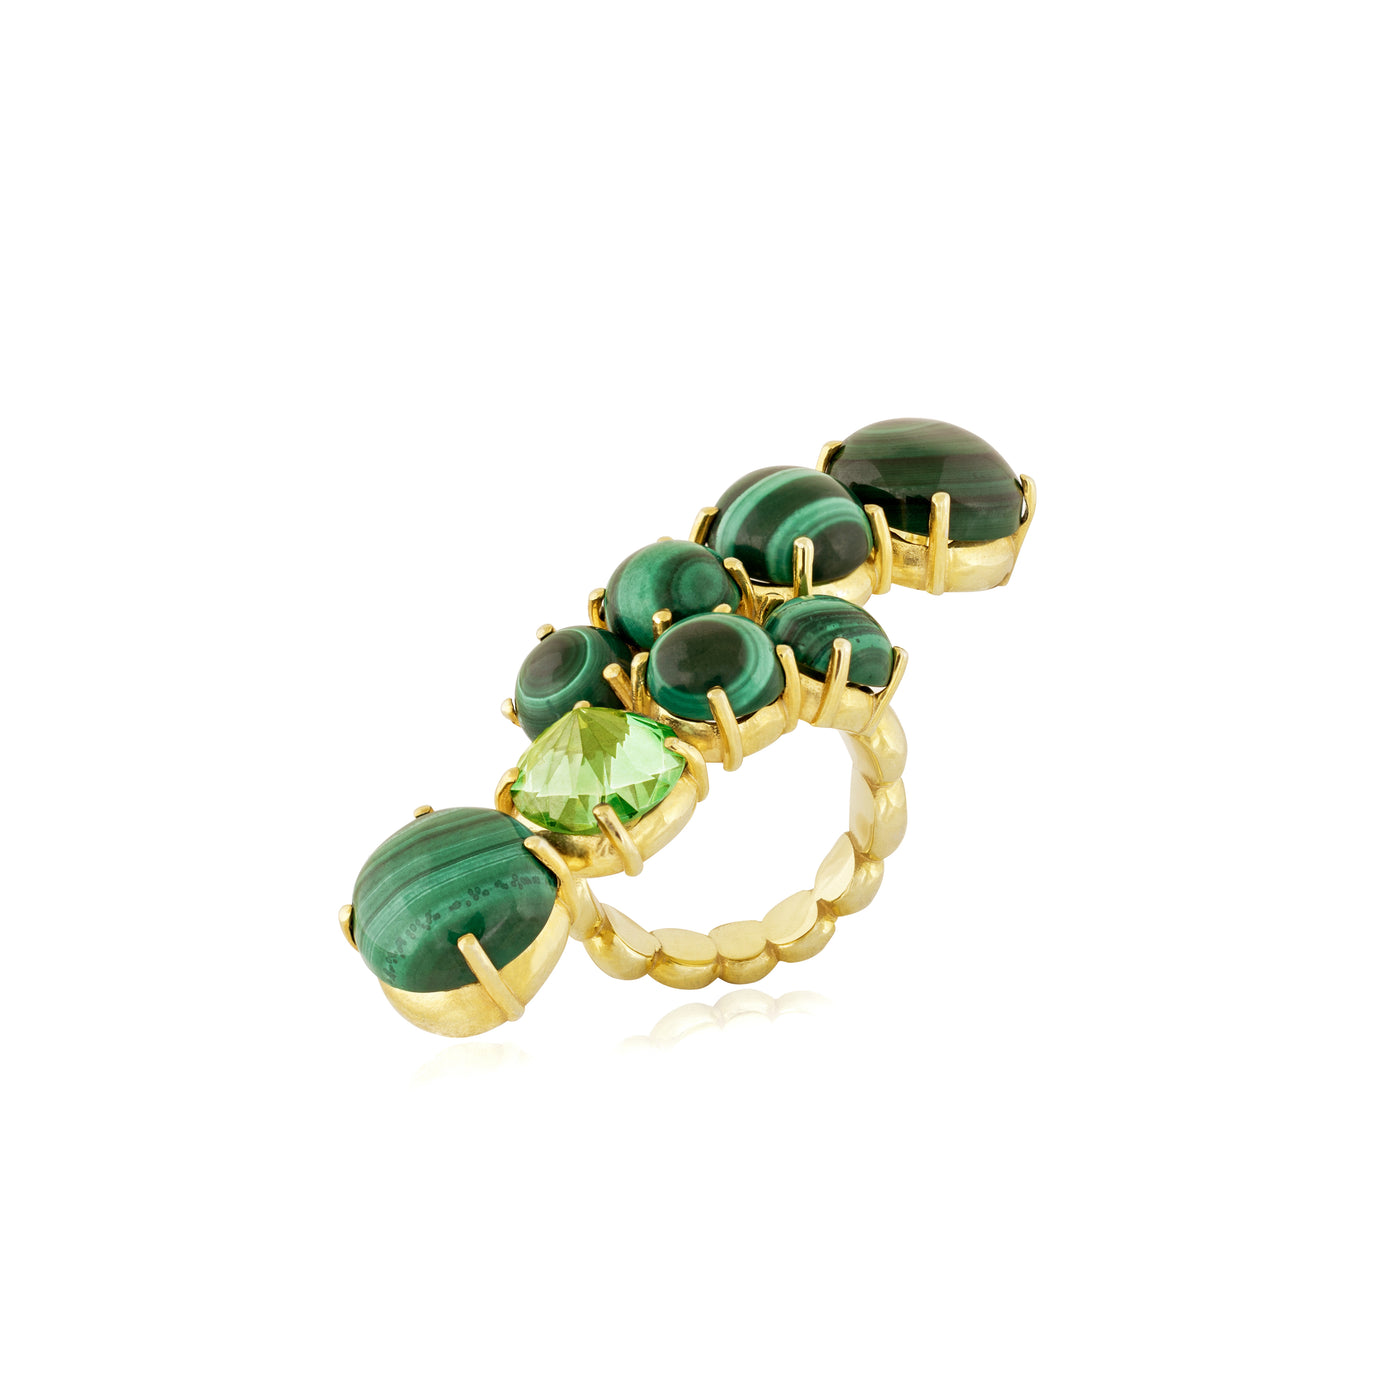 fine jewelry cocktail ring in gold with green malachite and peridot gemstones from Atelier ORMAN